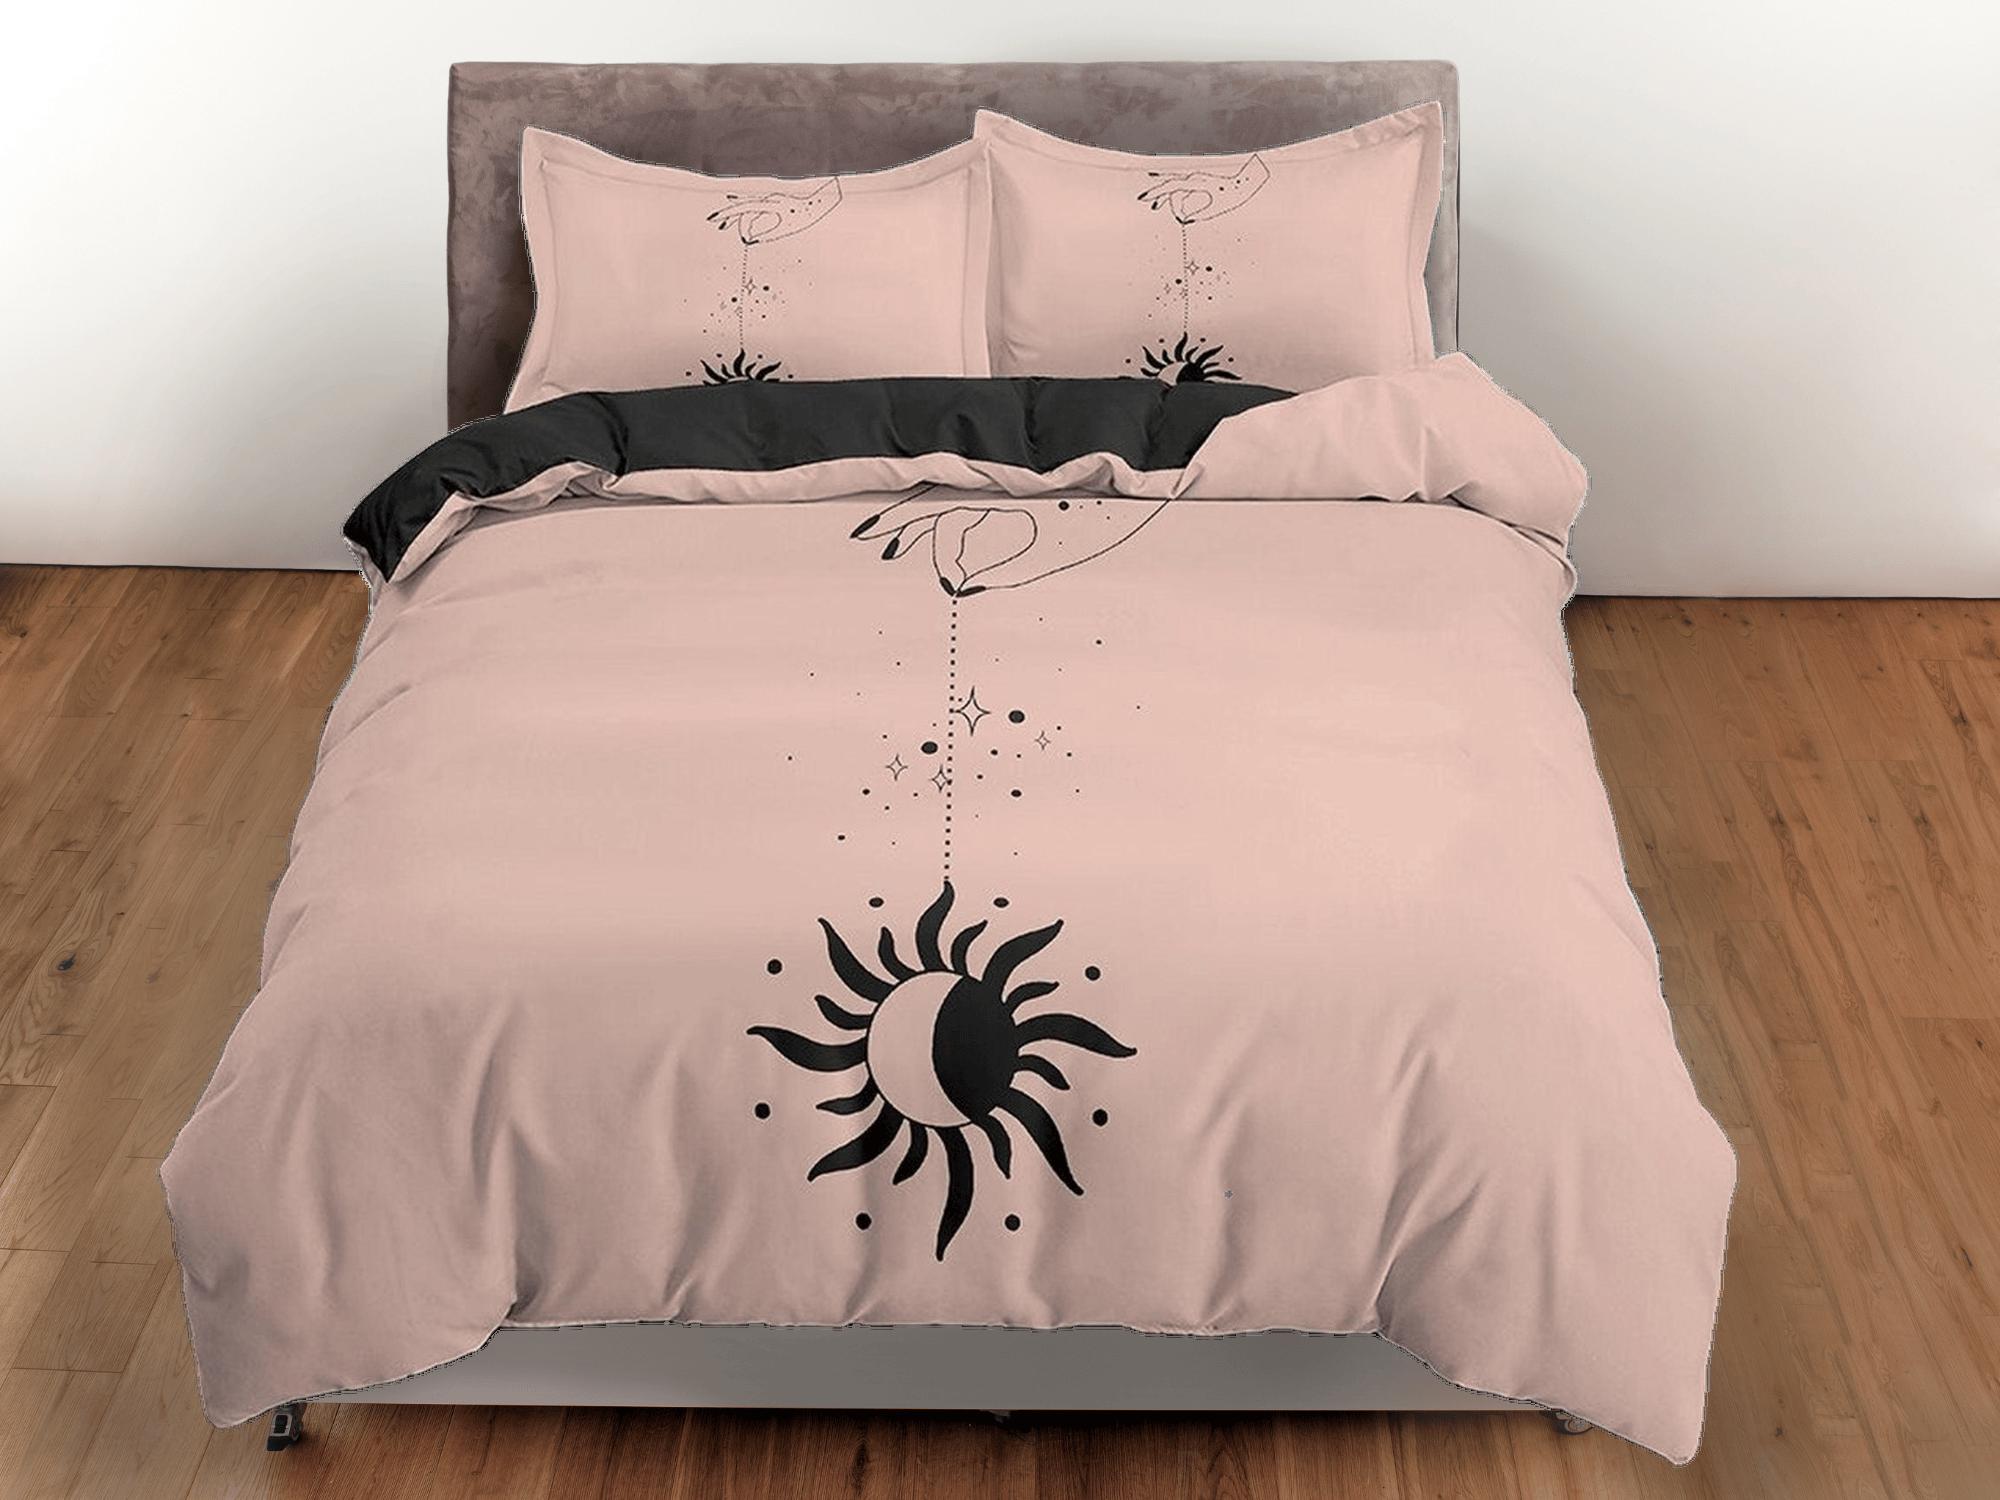 daintyduvet Minimalist Bedding with Black Moon and Sun, Beige Duvet Cover Set, Witchy Boho Dorm Bedding, Aesthetic Duvet King Queen Full Twin Single